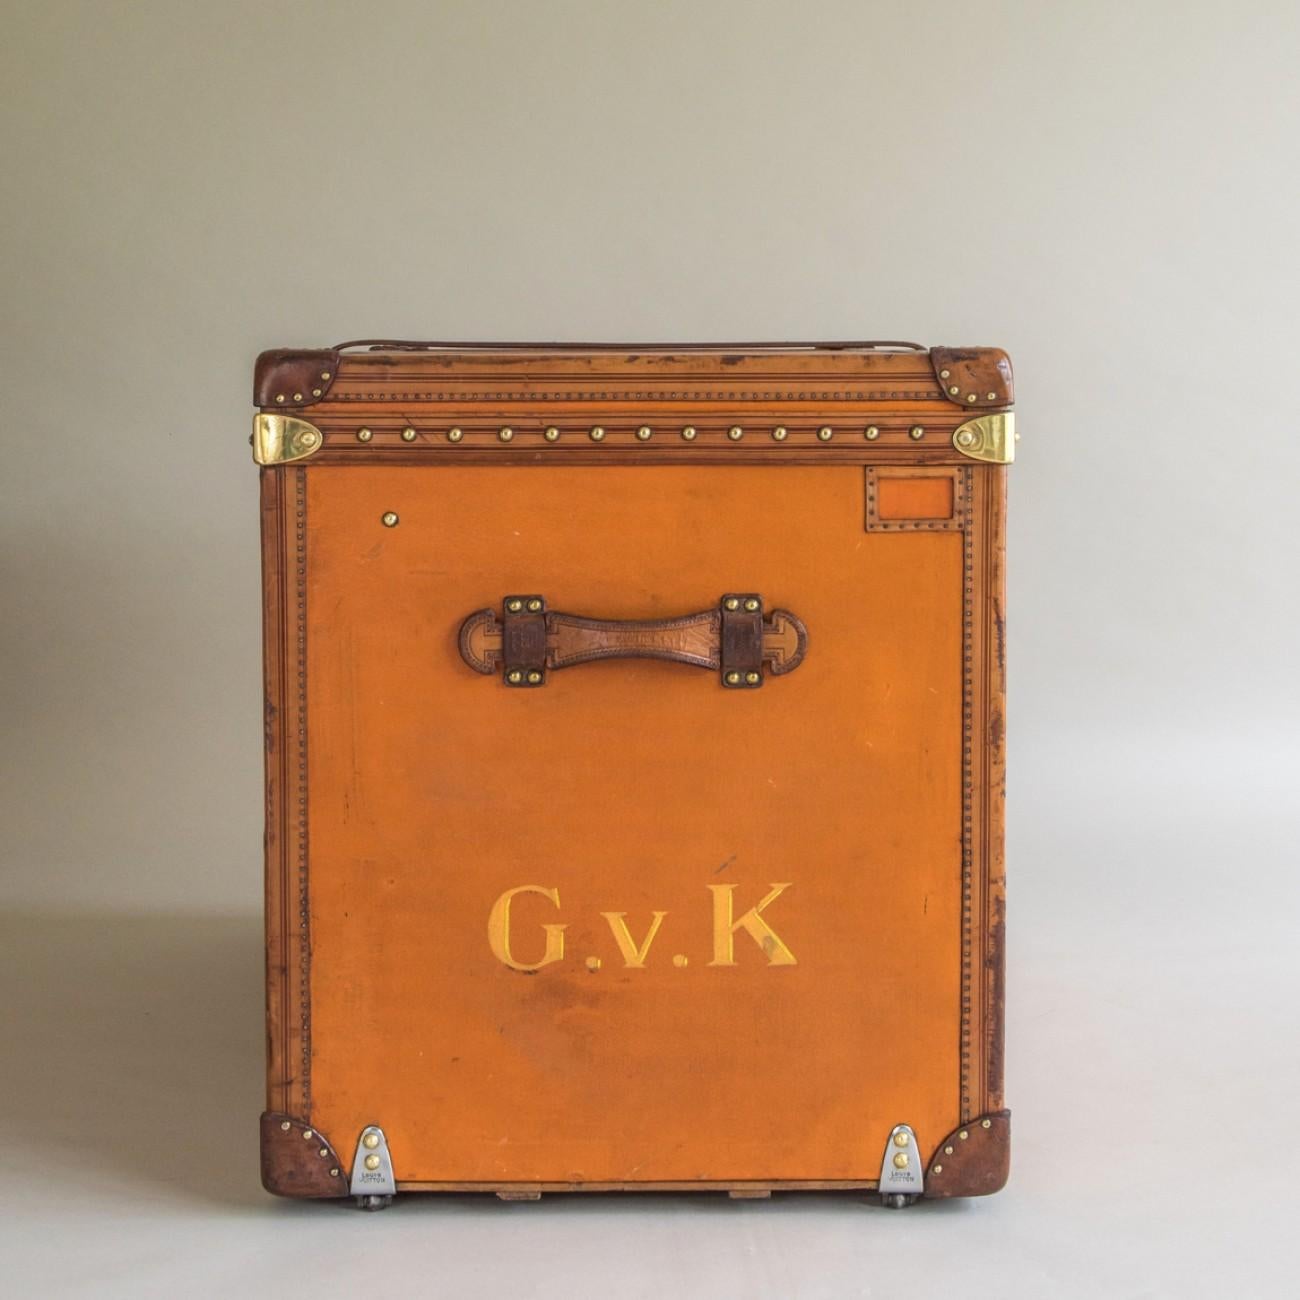 A splendid taller Louis Vuitton steamer trunk in orange Vuittonite (coated canvas) with leather trim to the edges, brass fittings, leather handles and original cotton lining to the interior. It even has the original leather strap around the middle